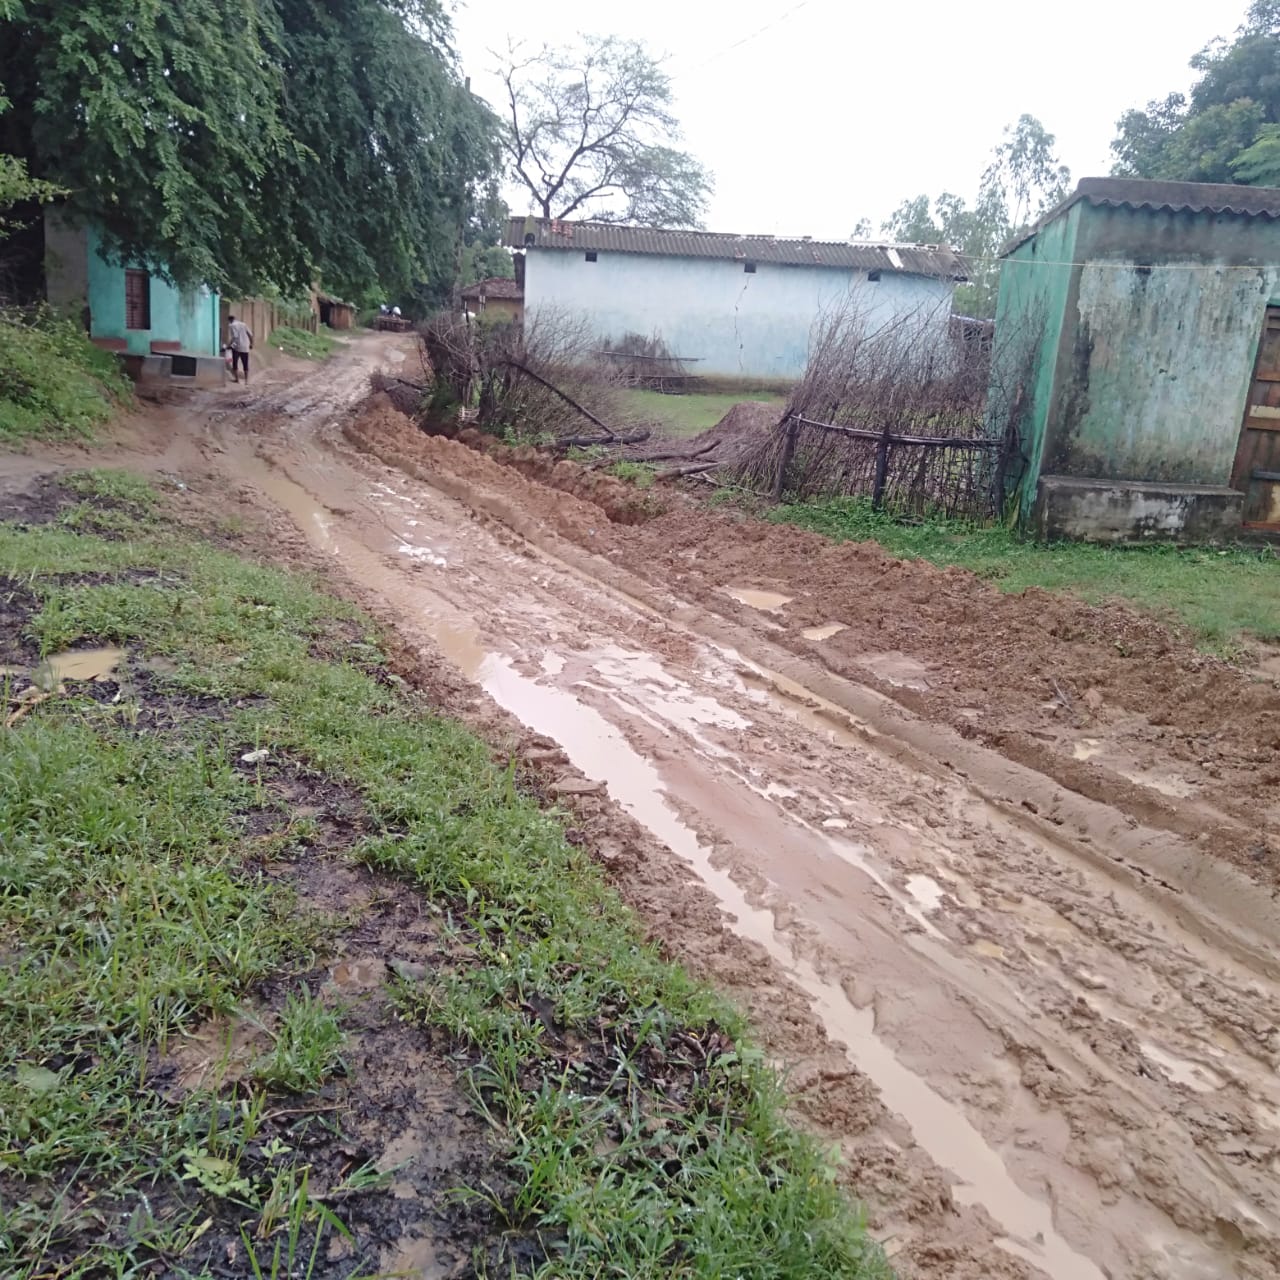 A pit dug laying pipeline, a swampy road made in rain water